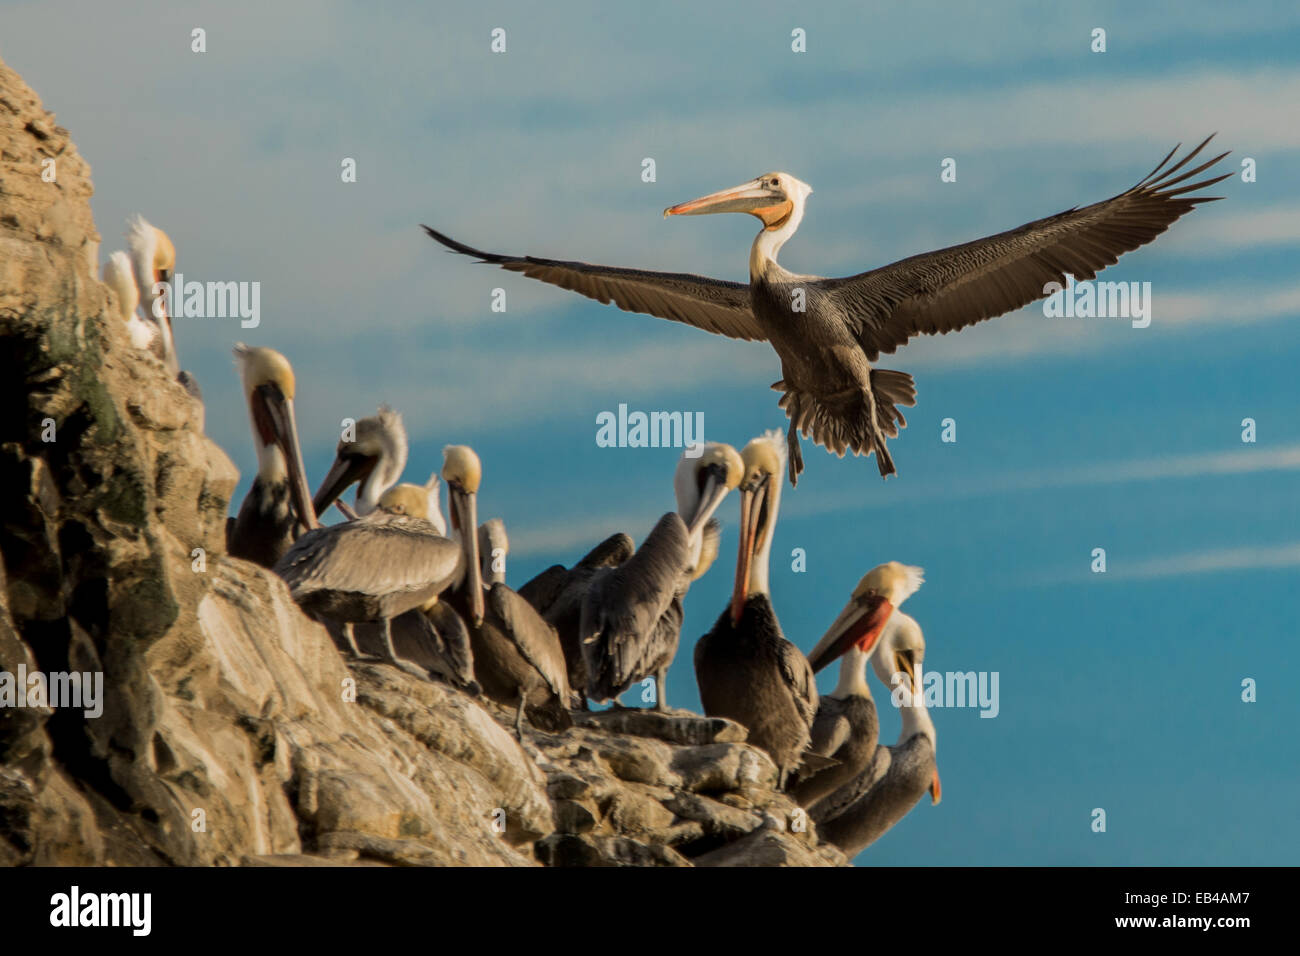 Juvenile Brown Pelican coming in for a landing on a rock with blue sky clouds and a group of pelicans. Stock Photo